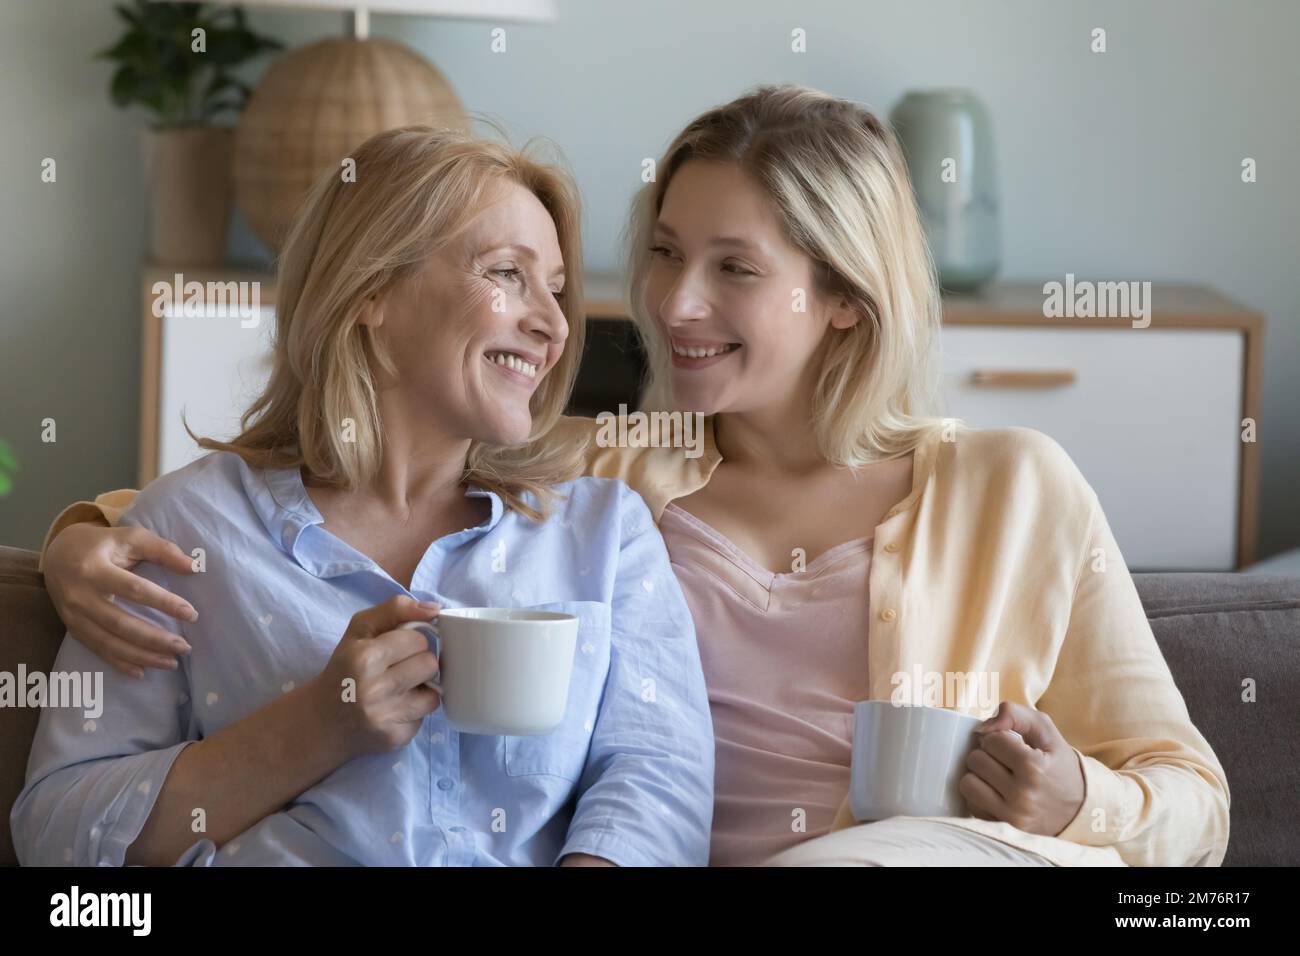 Positive young adult daughter woman and happy middle aged mom Stock Photo